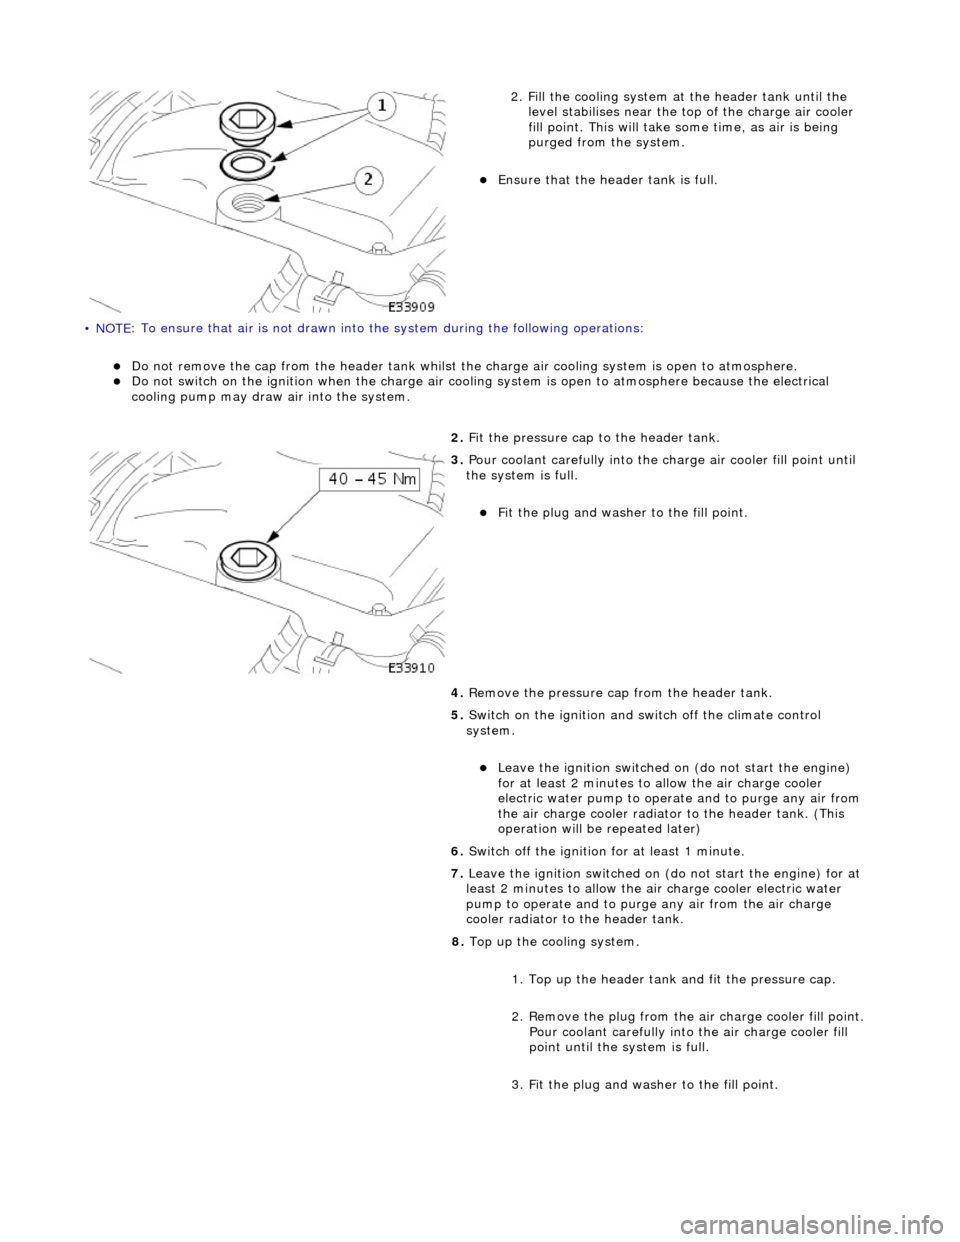 JAGUAR X308 1998 2.G Workshop Manual • NOTE
 : To ensure that
 air is not drawn into the system during the following operations: 
Do
  not remove the cap from the header tank whilst the 
charge air cooling system is open to atmosphe